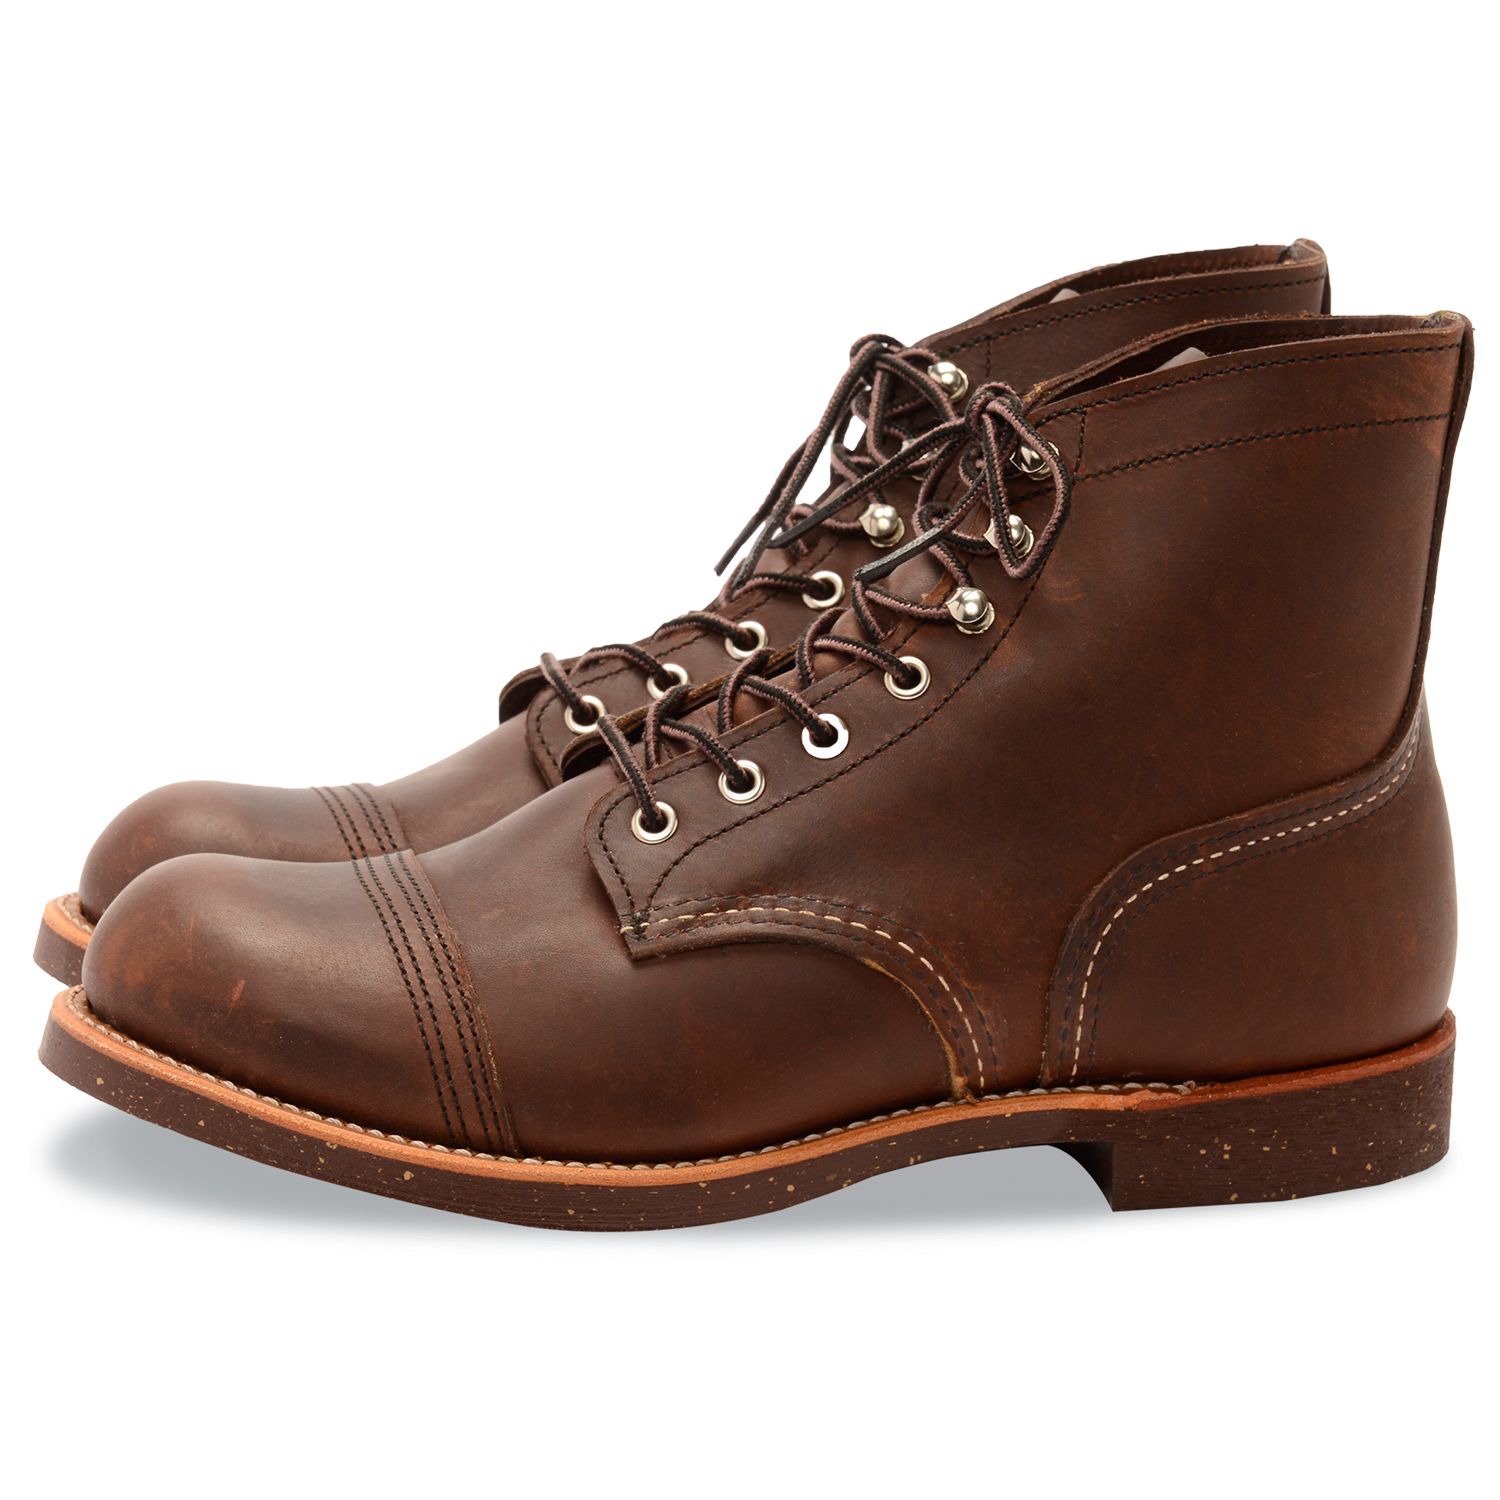 Red Wing 8111 Iron Ranger Boots, Amber Harness, 7